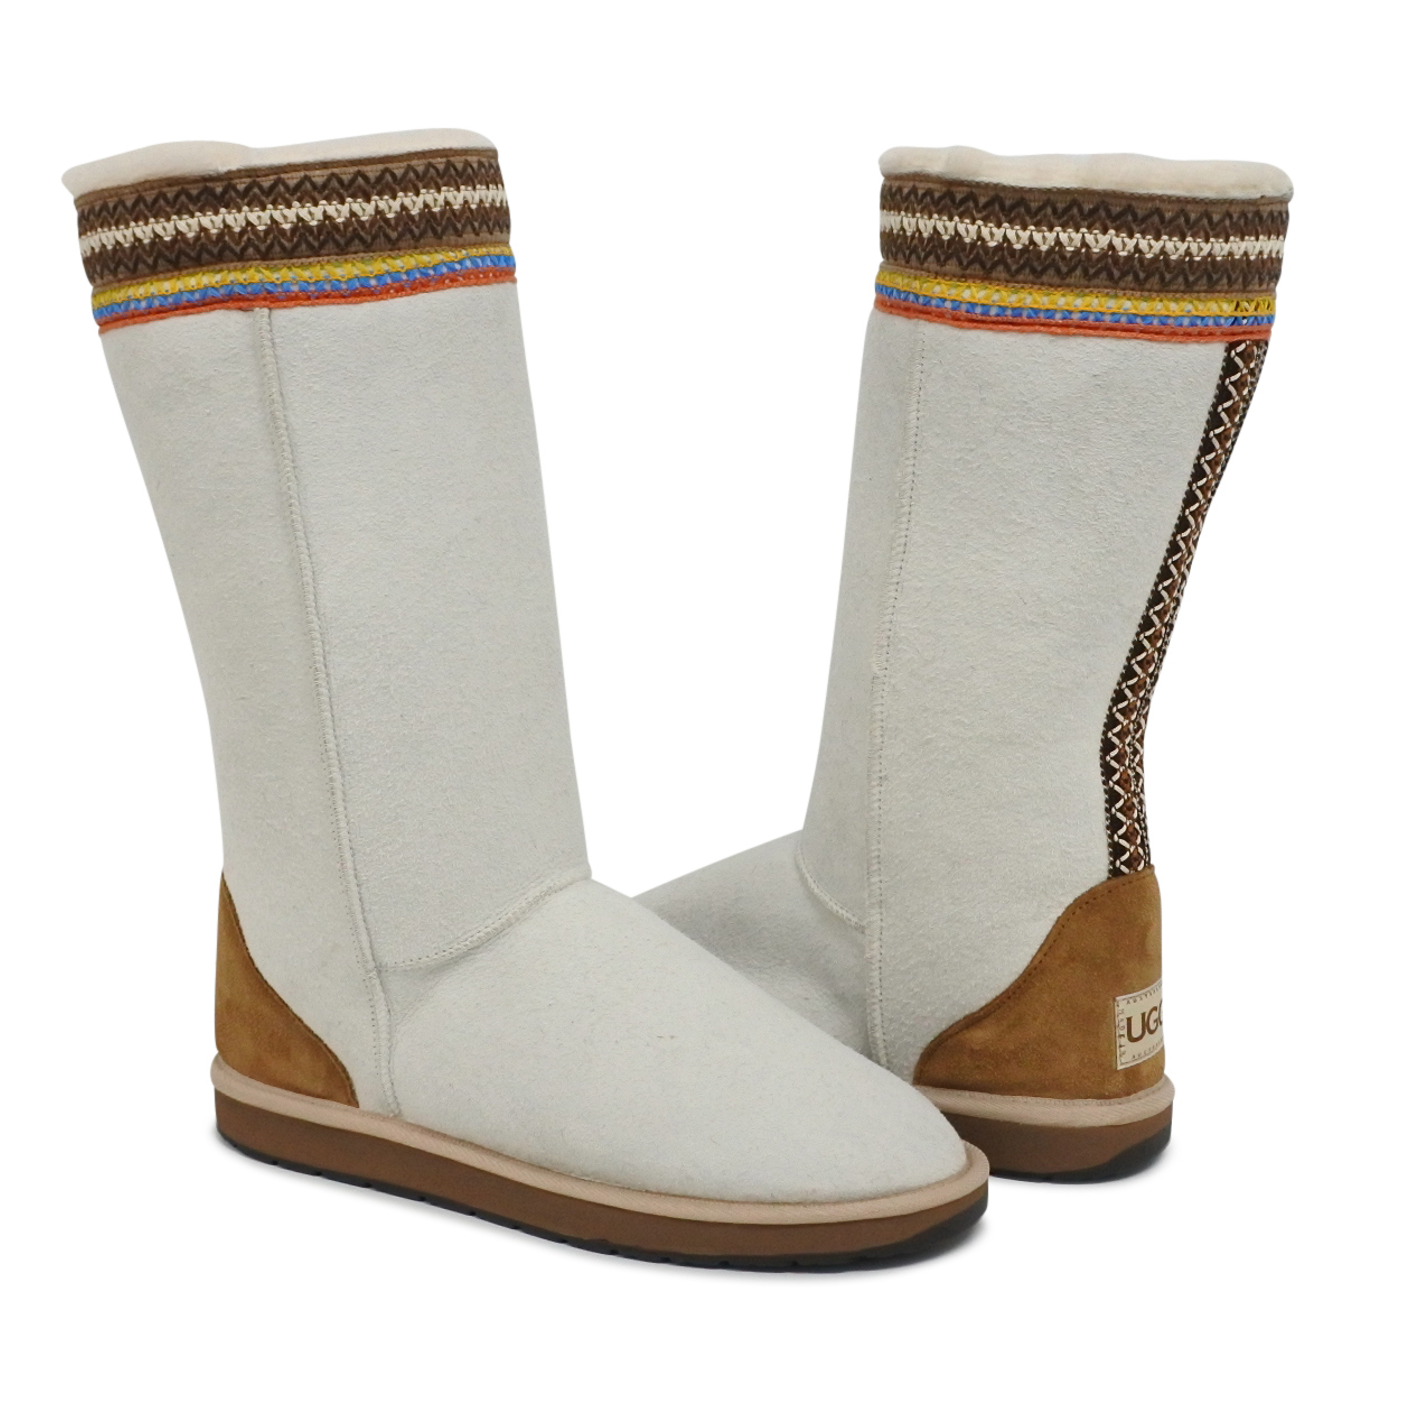 WOMEN'S NOMAD BOOTS